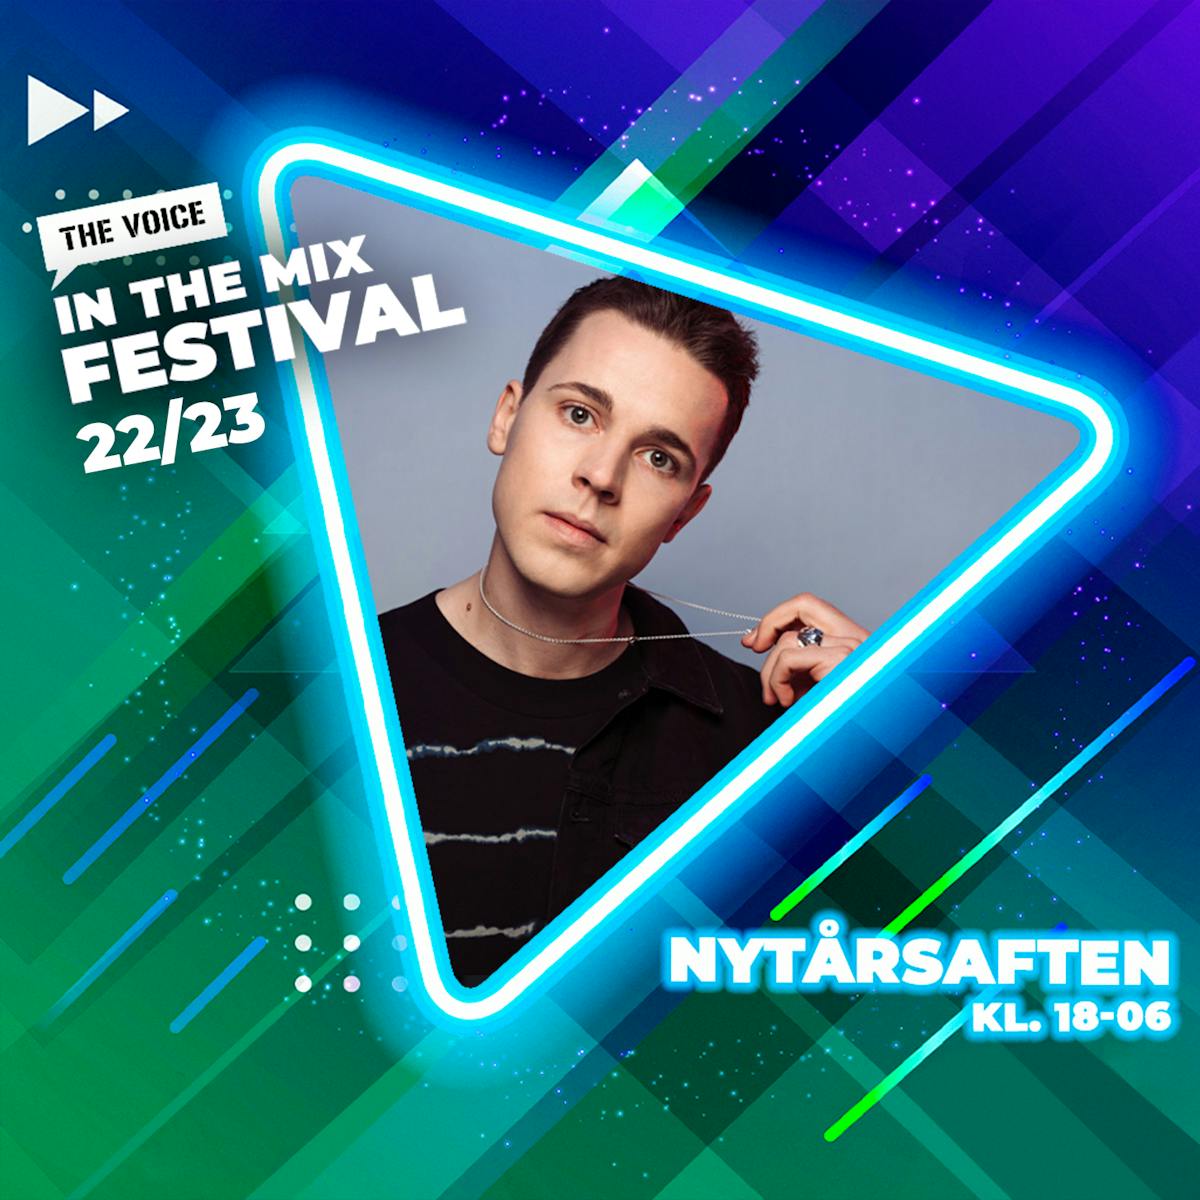 Felix Jaehn - The Voice The Mix Festival 22/23 - The Voice In The - The Voice